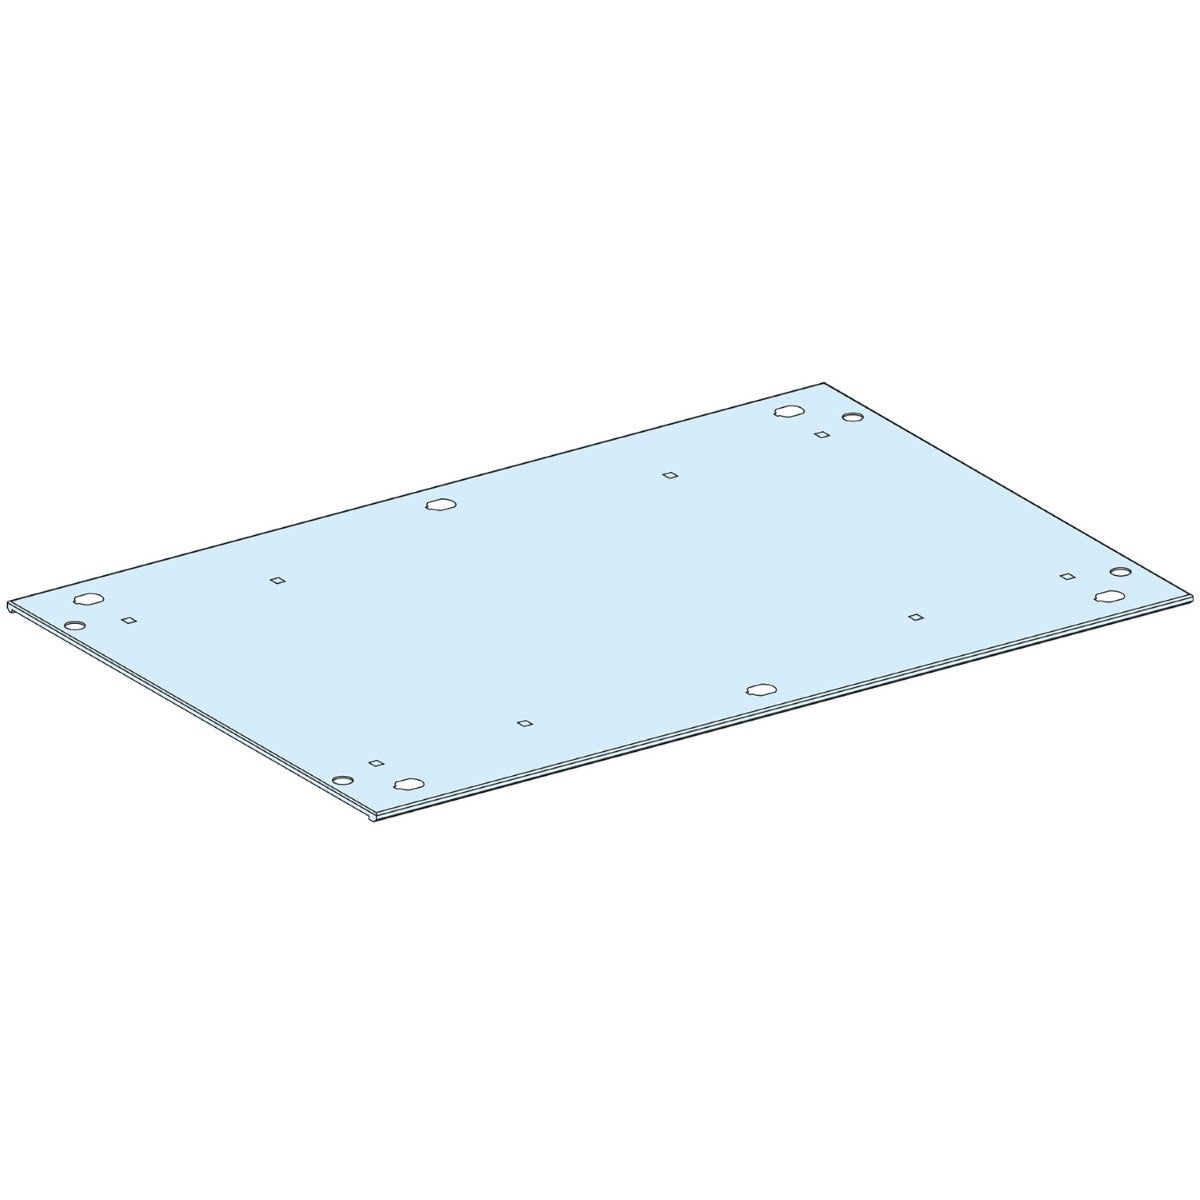 Roof plate, PrismaSeT P, for enclosure, W300mm, D400mm, IP55, white, RAL 9003